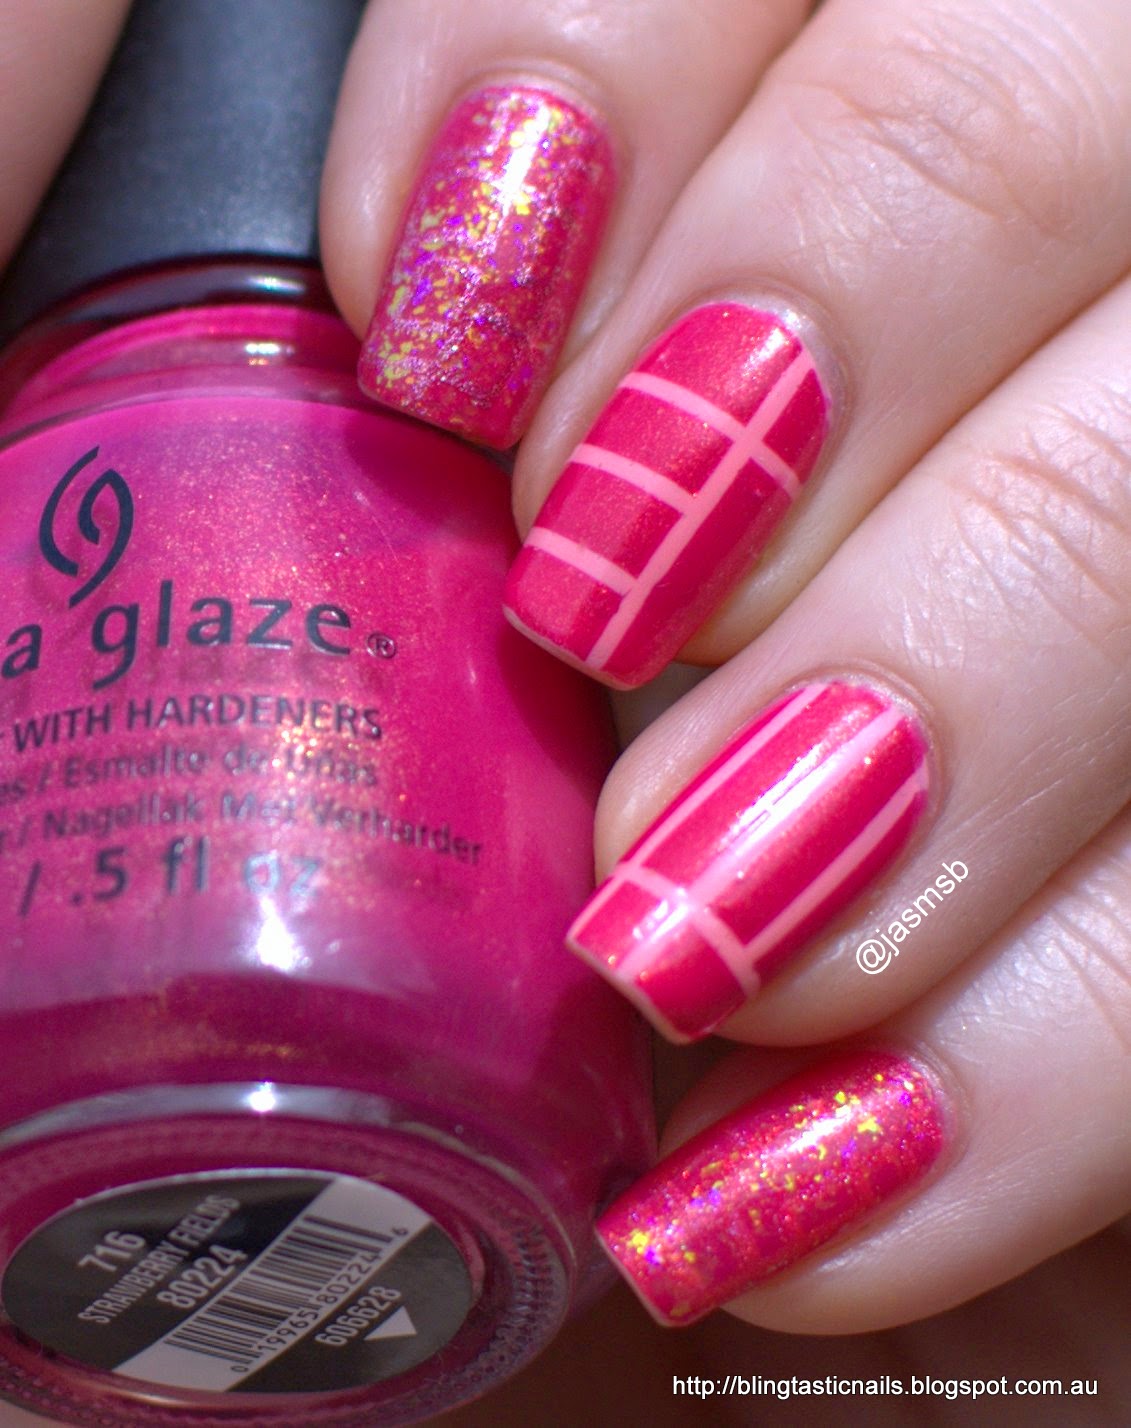 China Glaze Strawberry Fields with Maybelline Bleached Neon Tropink striping tape and Dance Legend Orlando